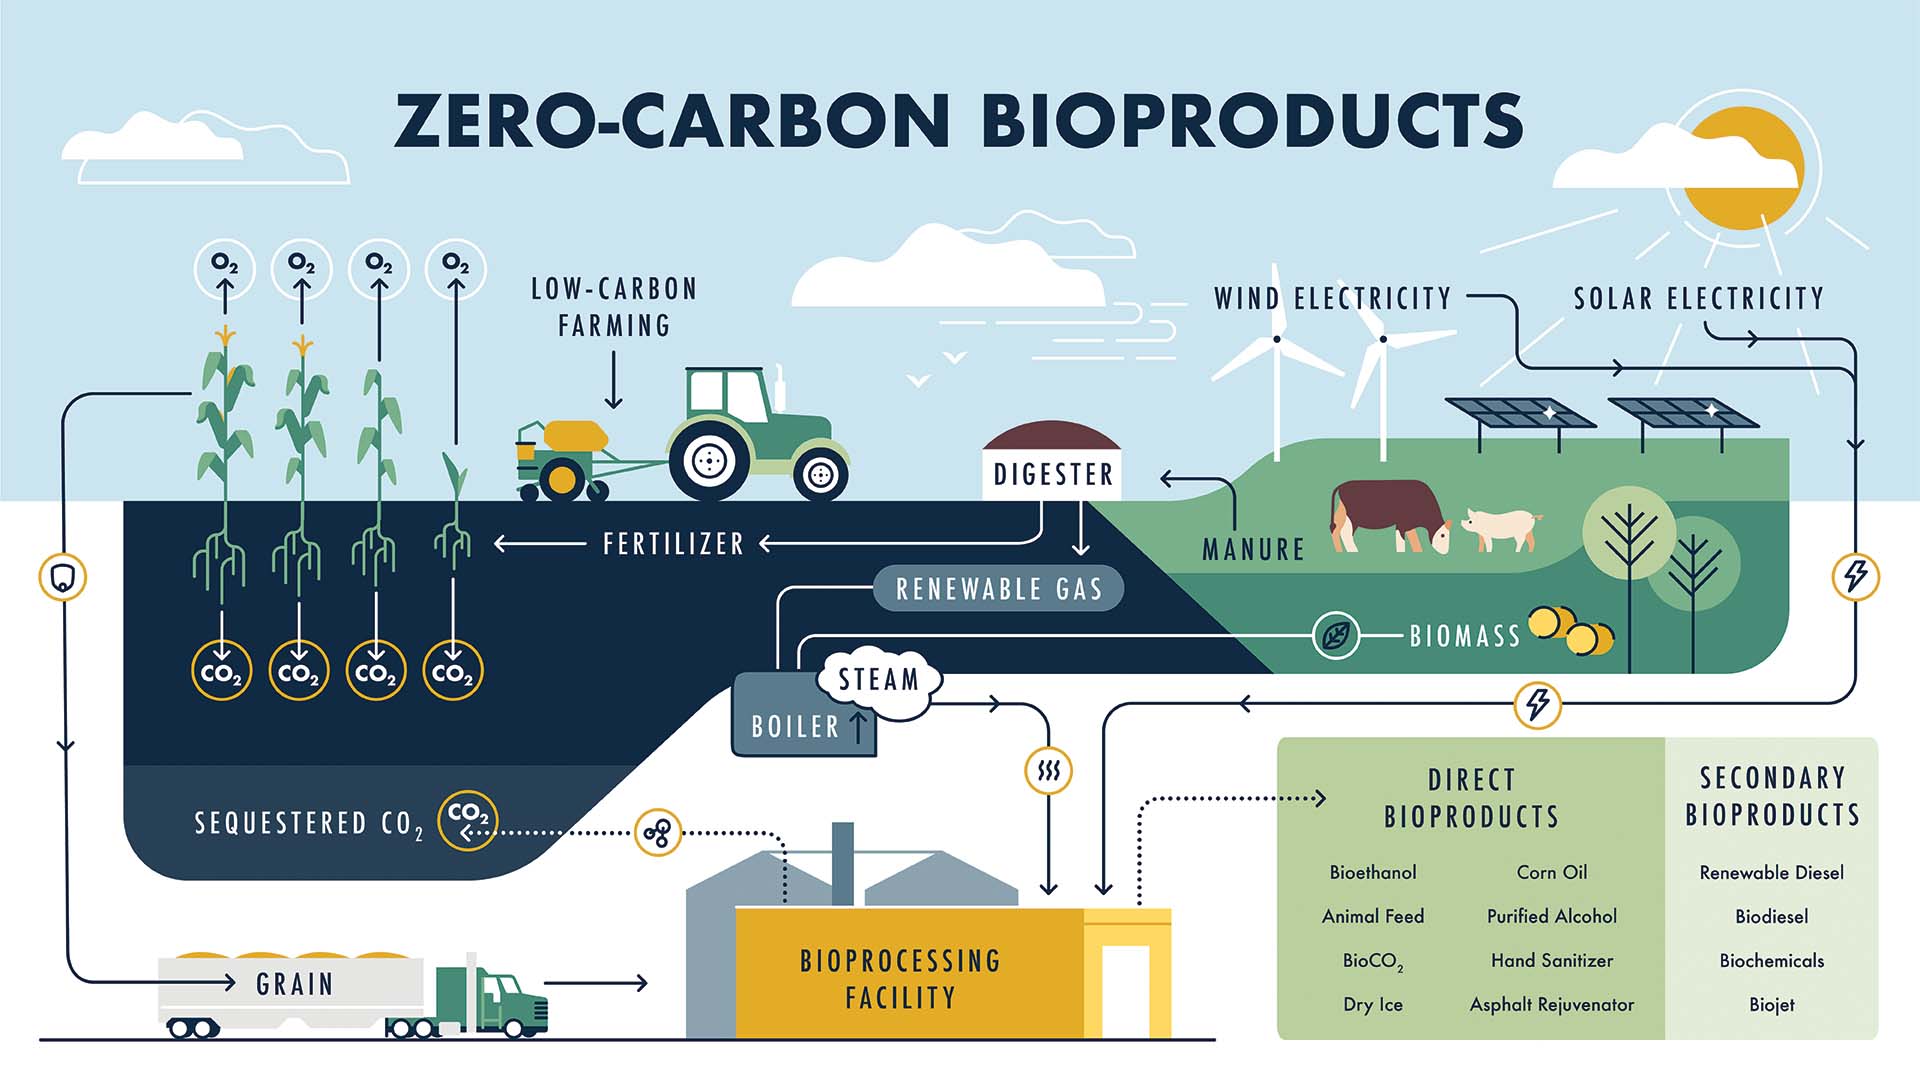 zero-carbon biproducts